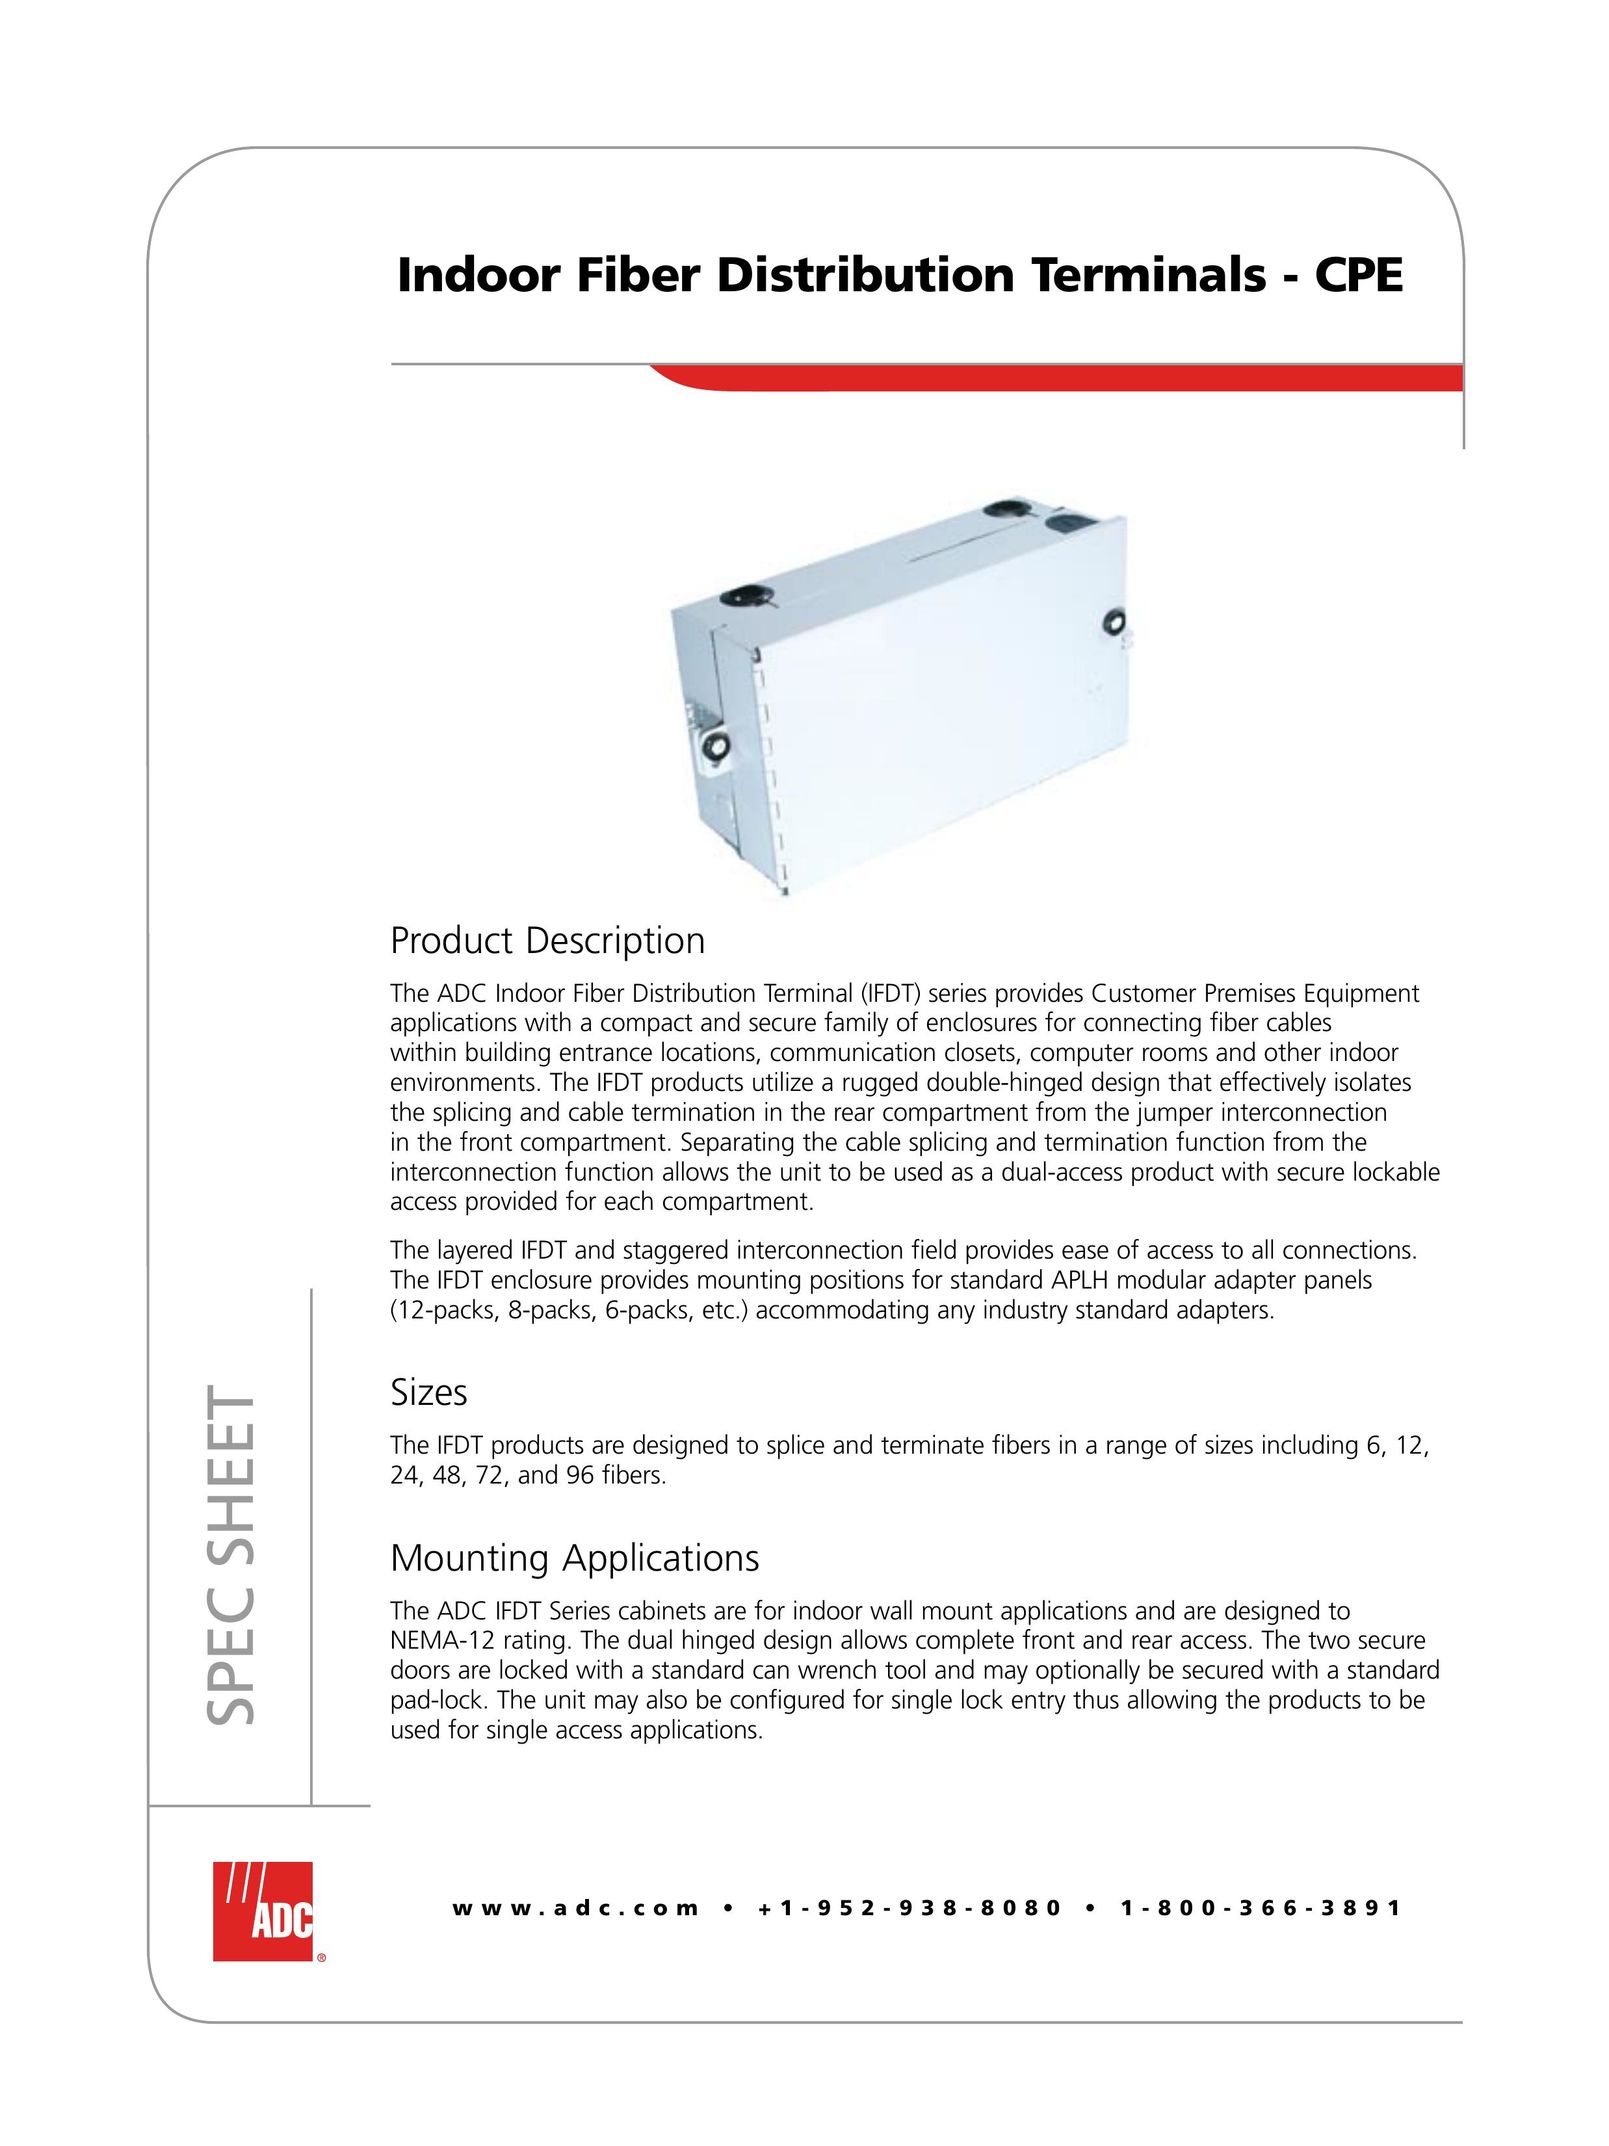 ADC Indoor Fiber Distribution Terminals Network Router User Manual